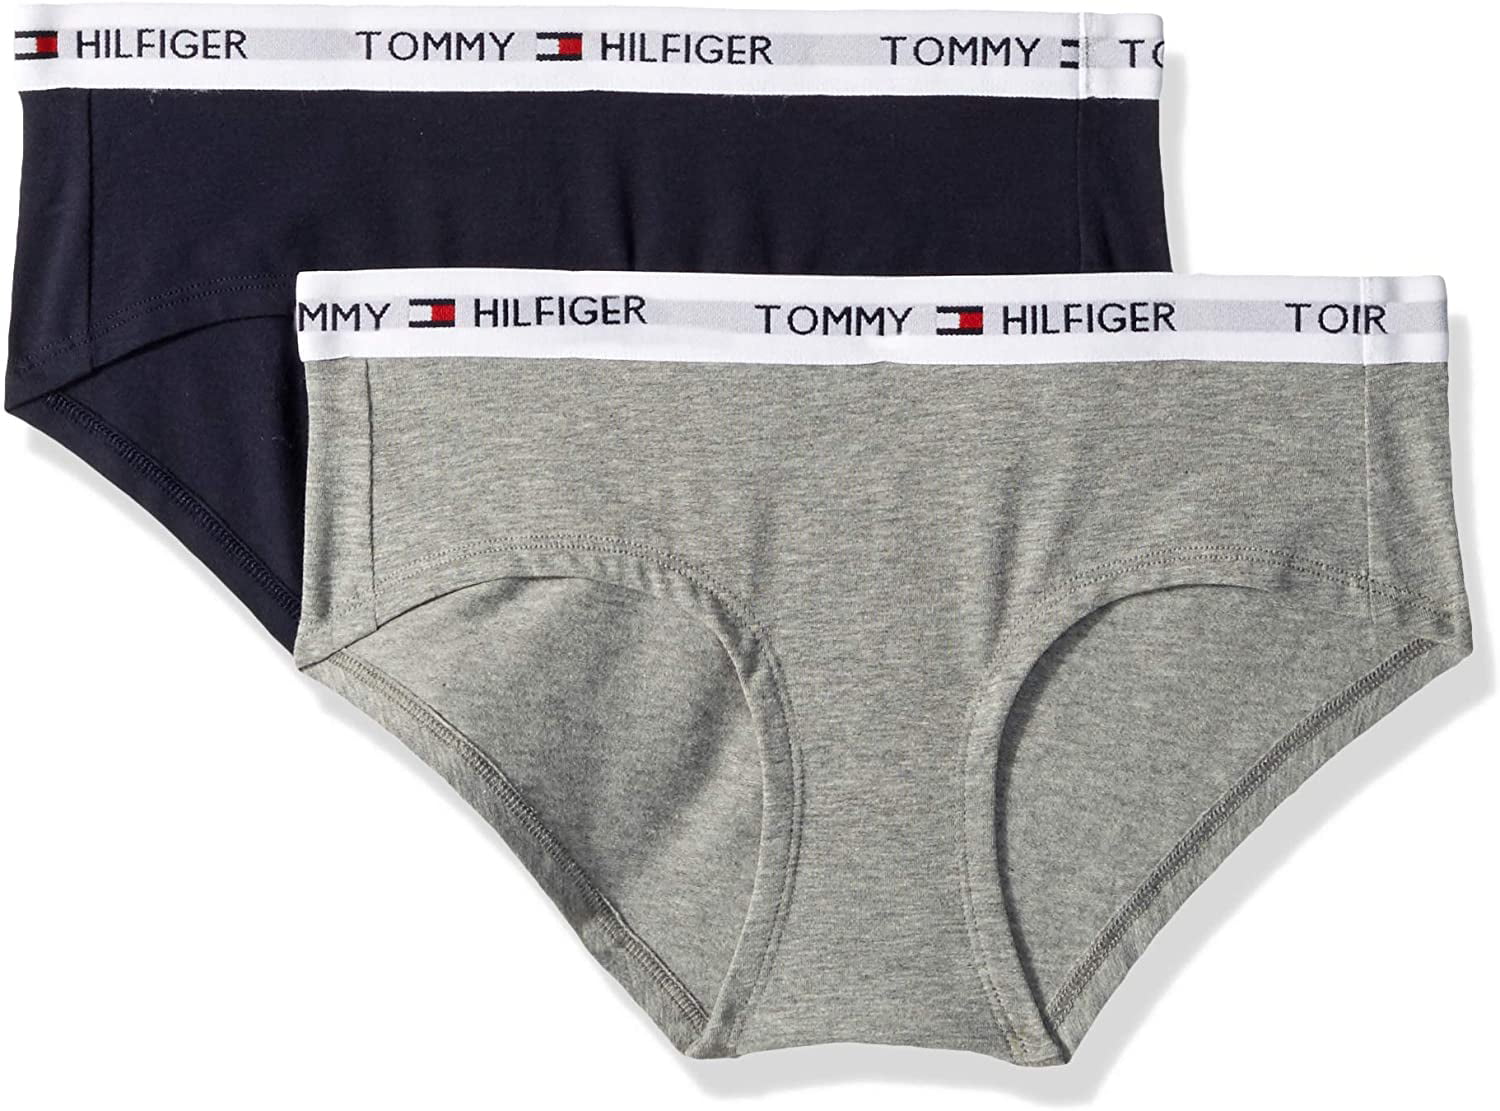 S M L Multi/Dog Print TOMMY HILFIGER 3-pack Women's HIPSTER Briefs Knickers 